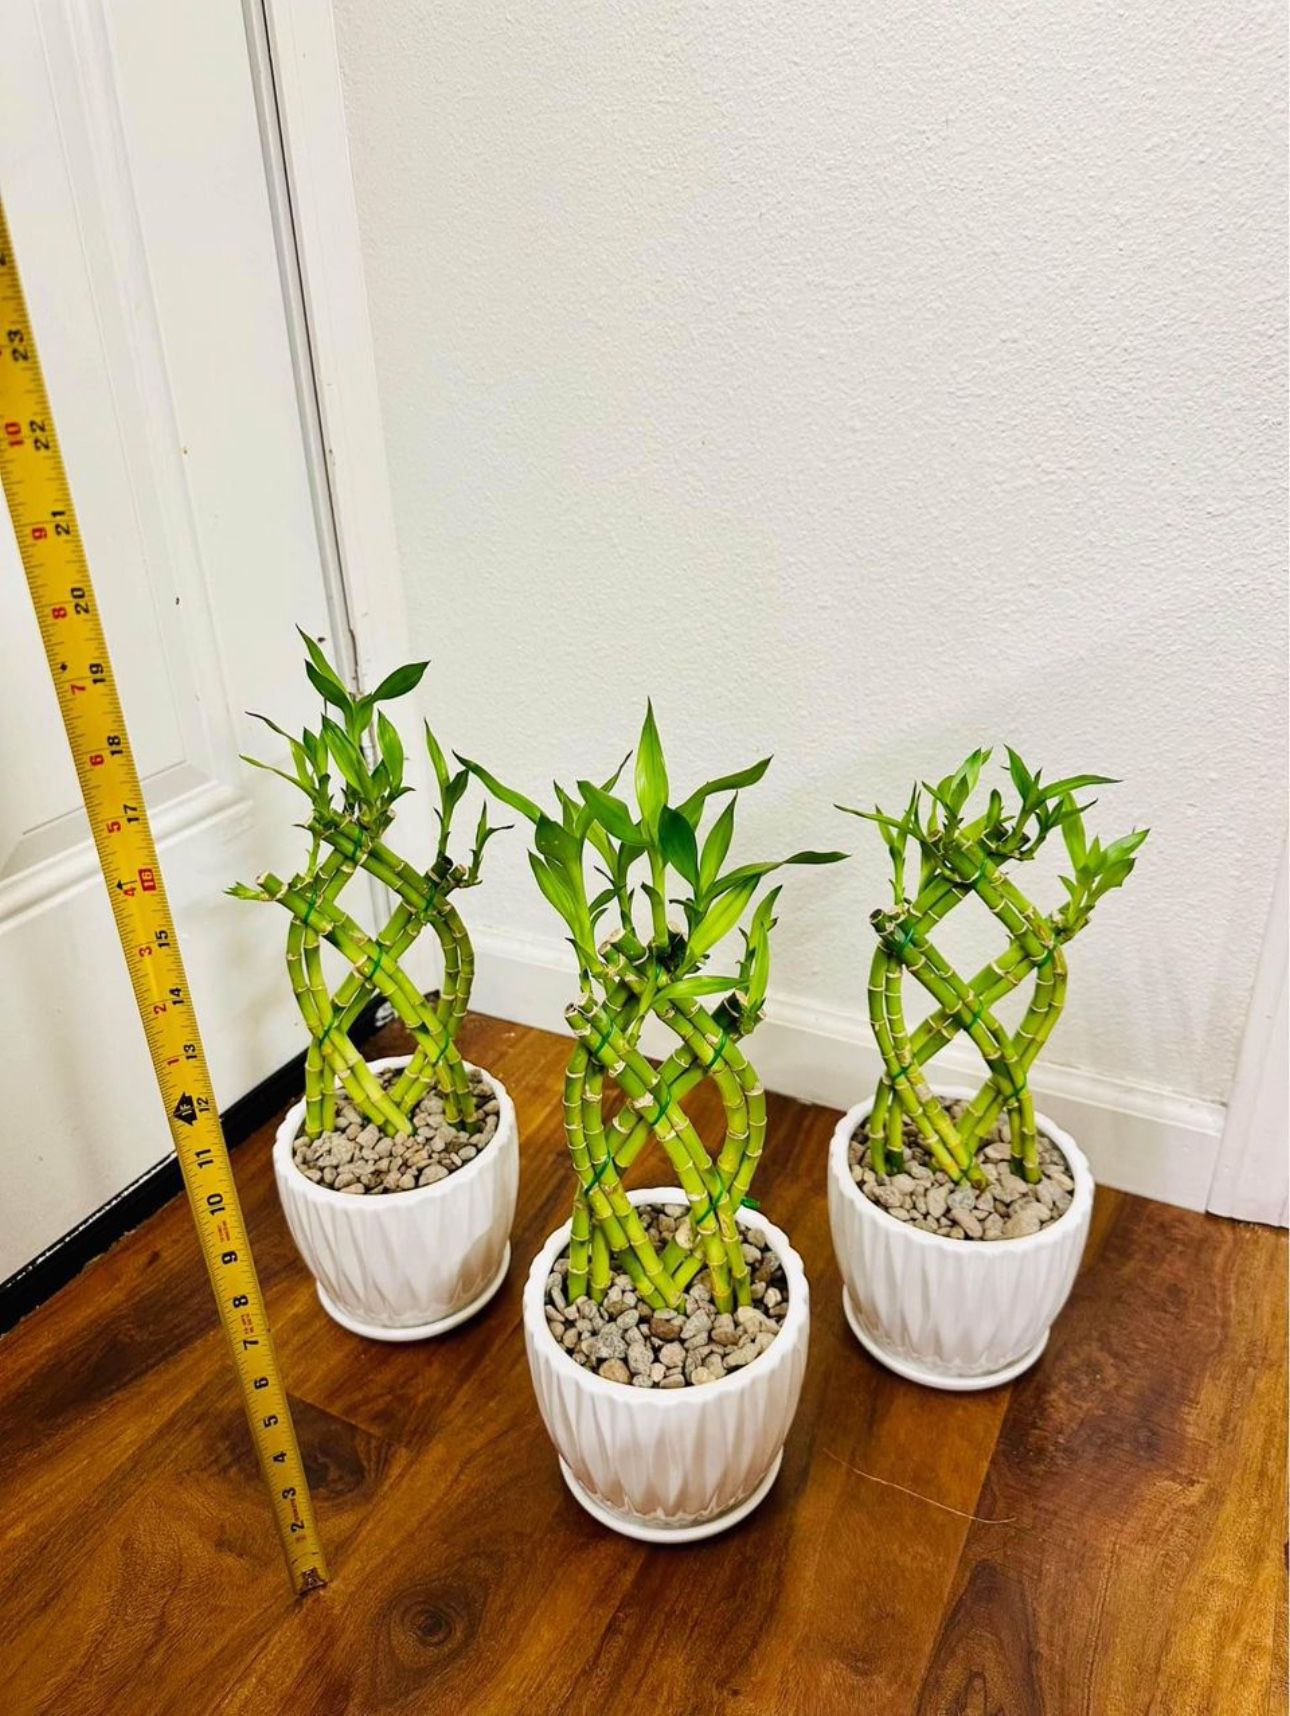 Trellis Lucky Bamboo Live Indoor Plant In Ceramic Pot $10/each